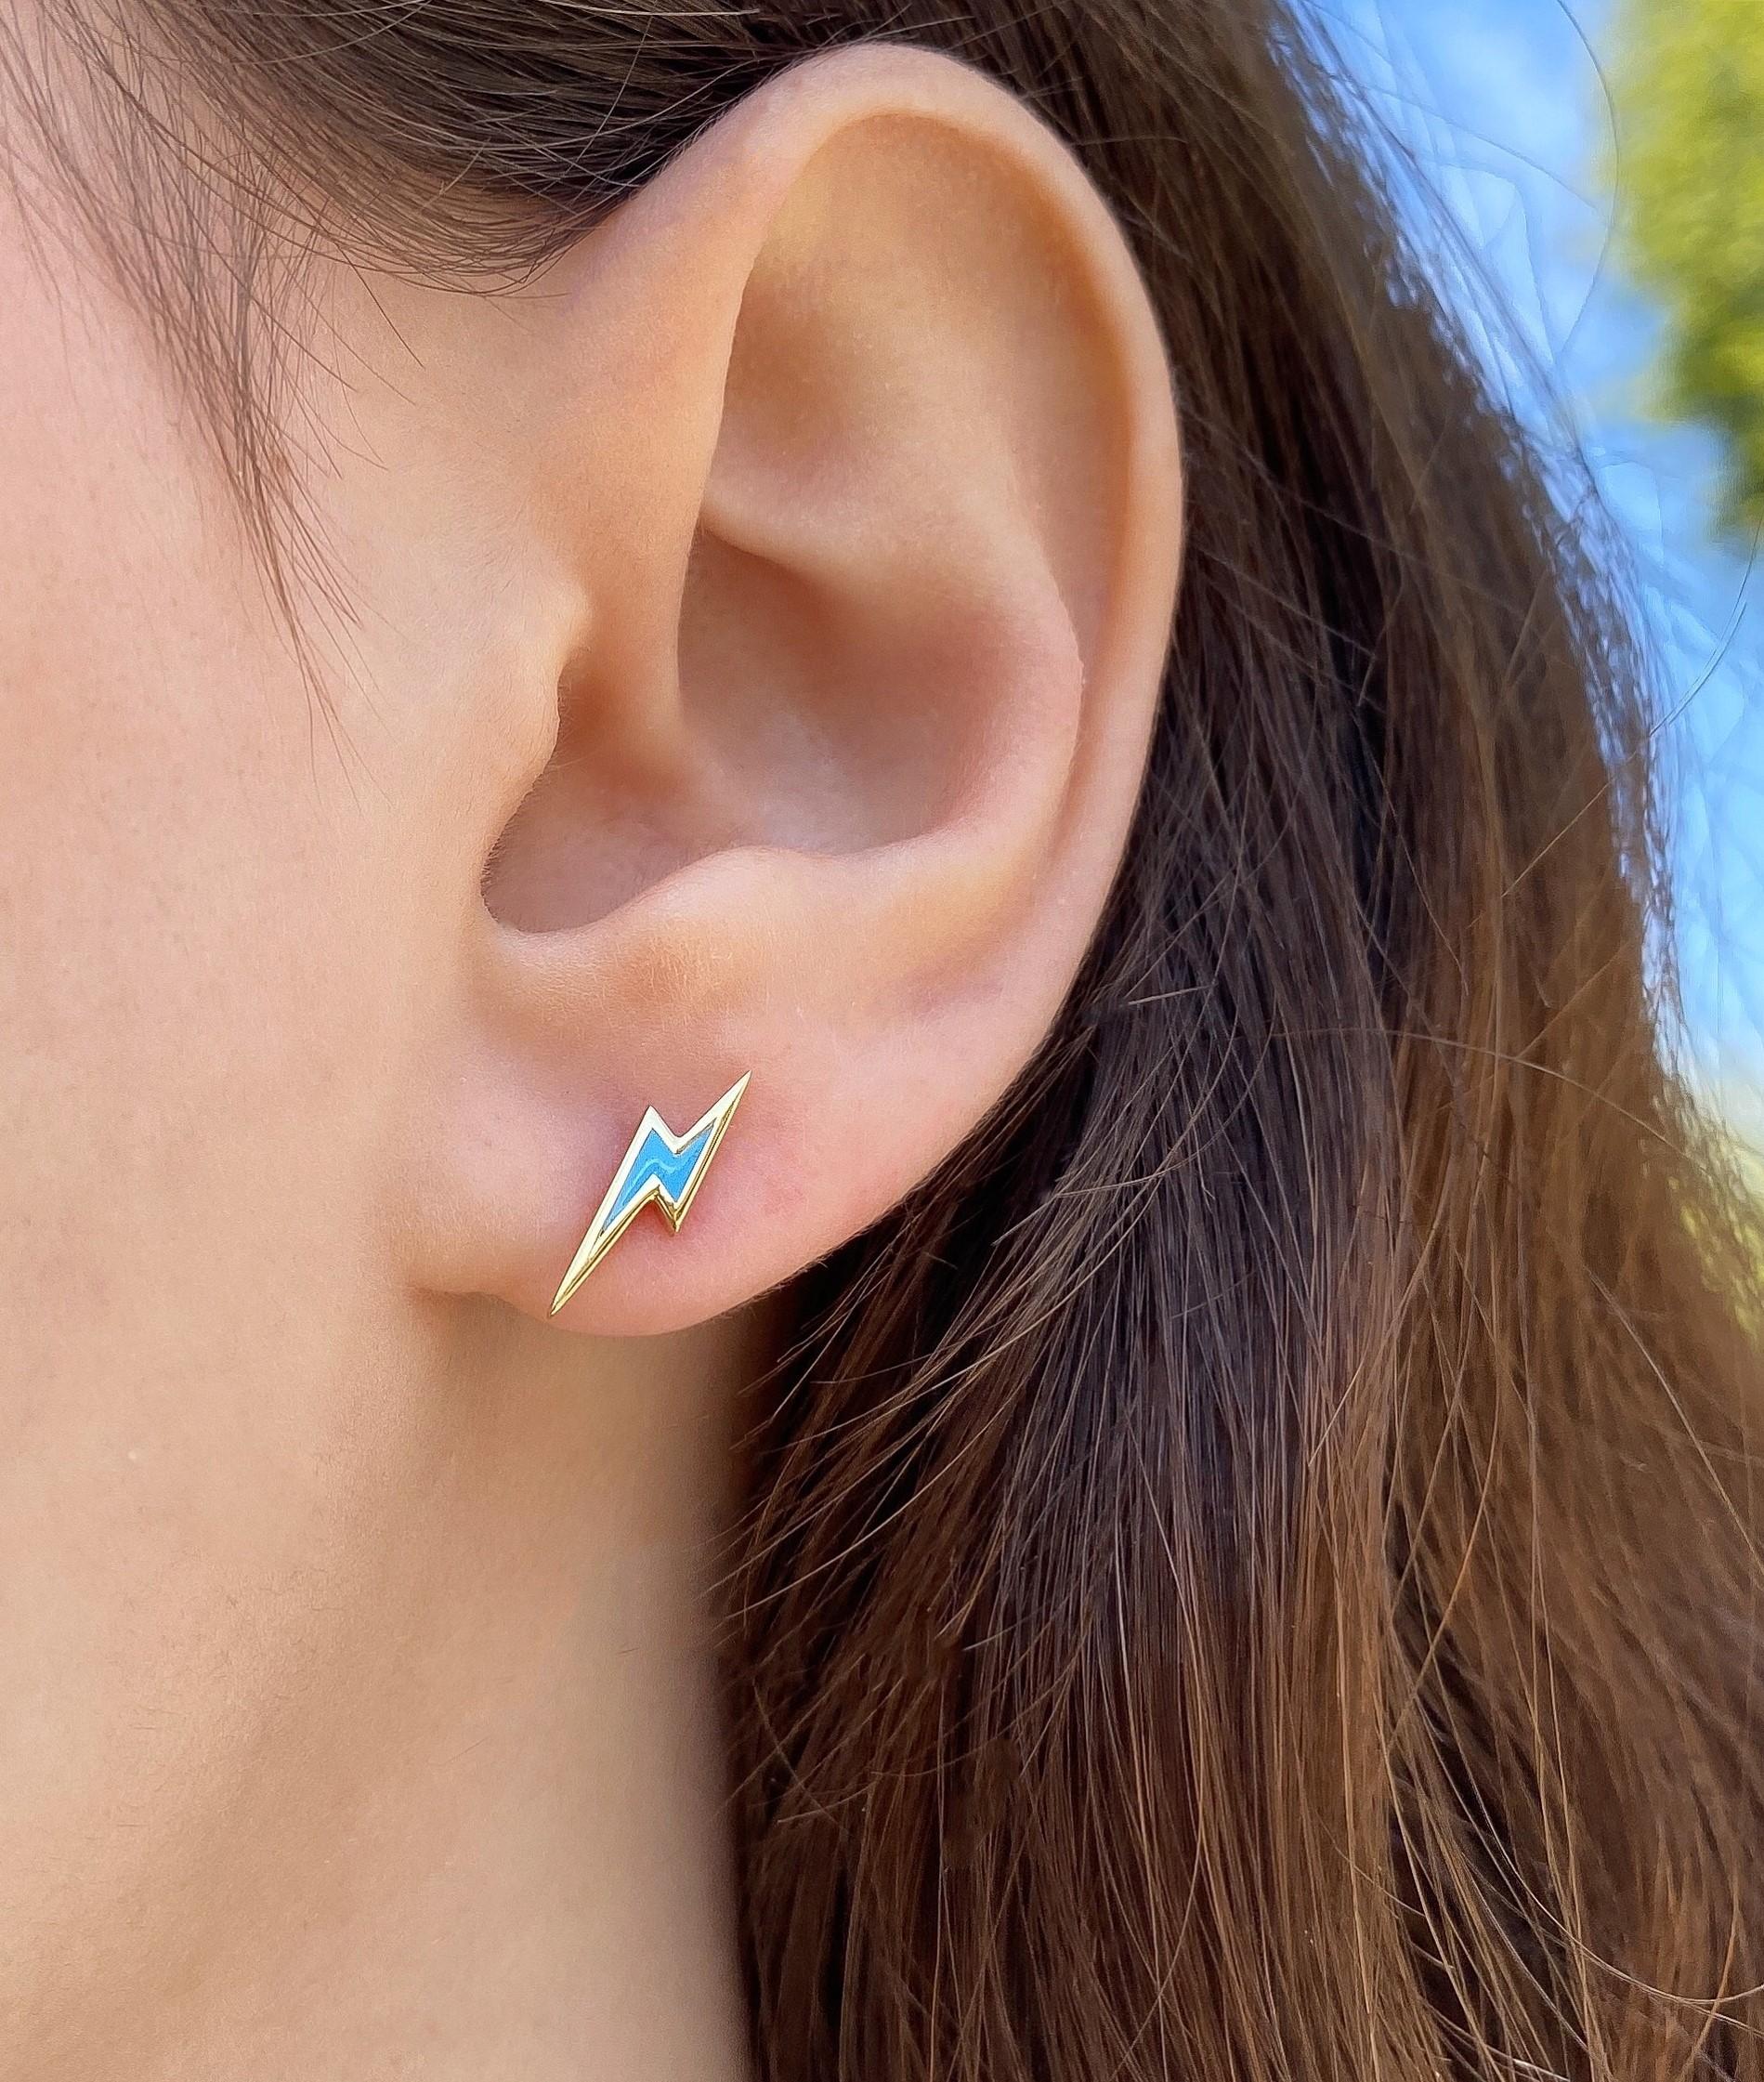 The Lighting bolt, ear studs are crafted in 18K yellow gold, hallmarked in Cyprus. These adorable studs come in a highly polished finish and come in two stunning options; a vibrant orange or a serene blue enamel, making them a perfect match for any